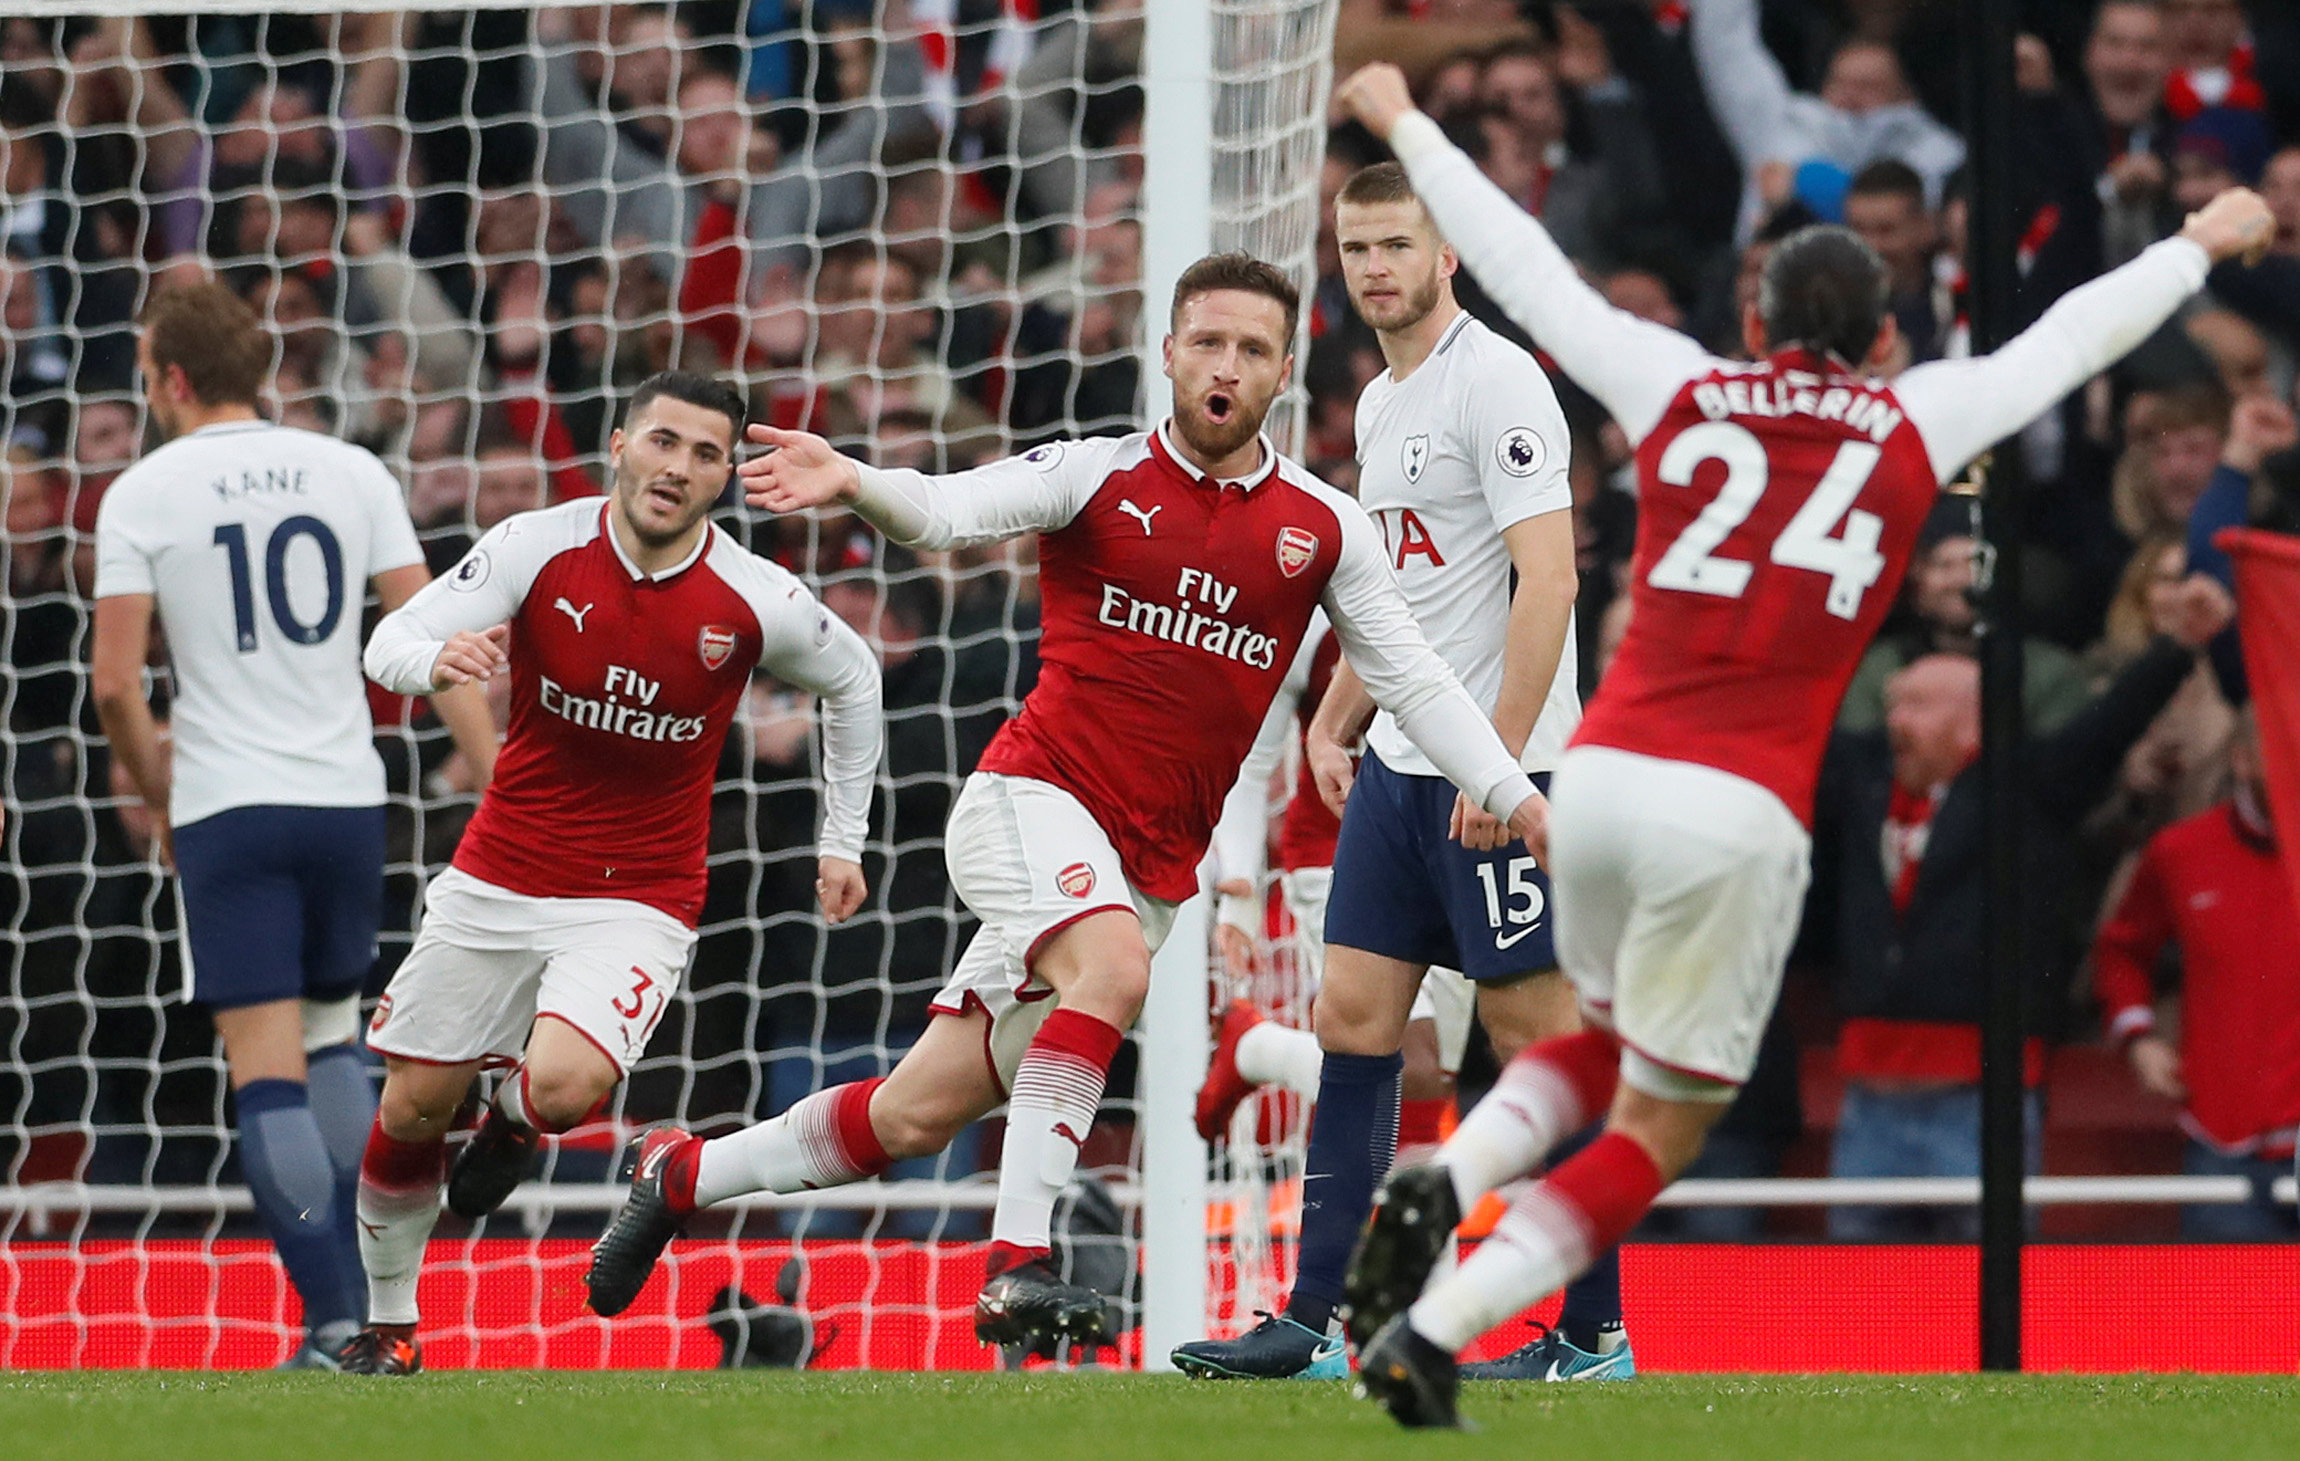 Football: Arsenal overpower Spurs in north London derby